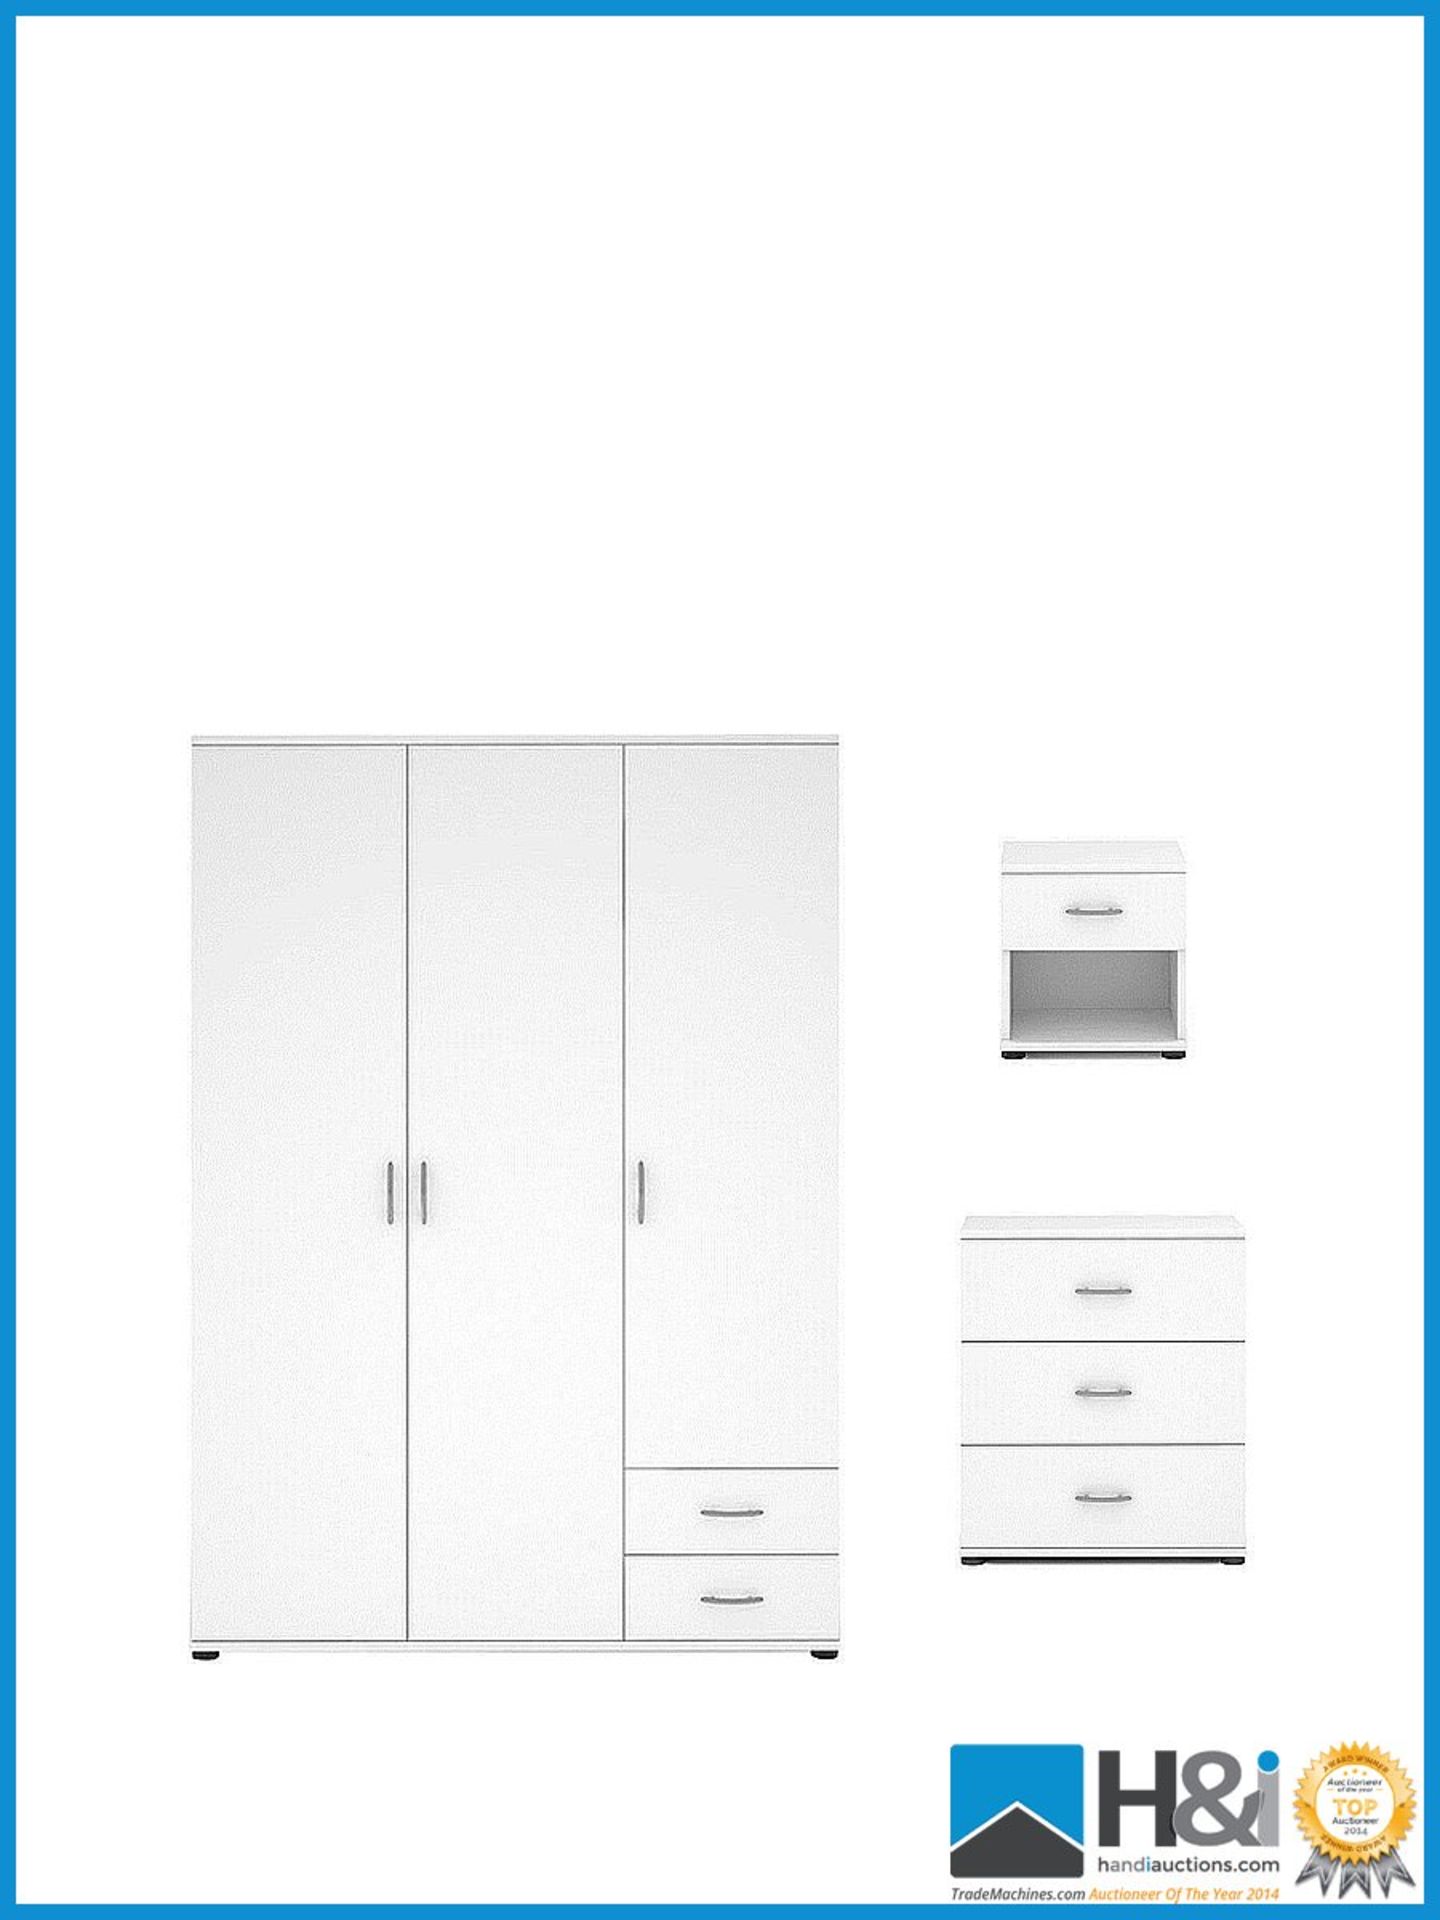 NEW IN BOX ALPHA 3 PIECE BEDROOM SET [WHITE] 172 x 121 x 52cm RRP £441 Appraisal: New, unused in